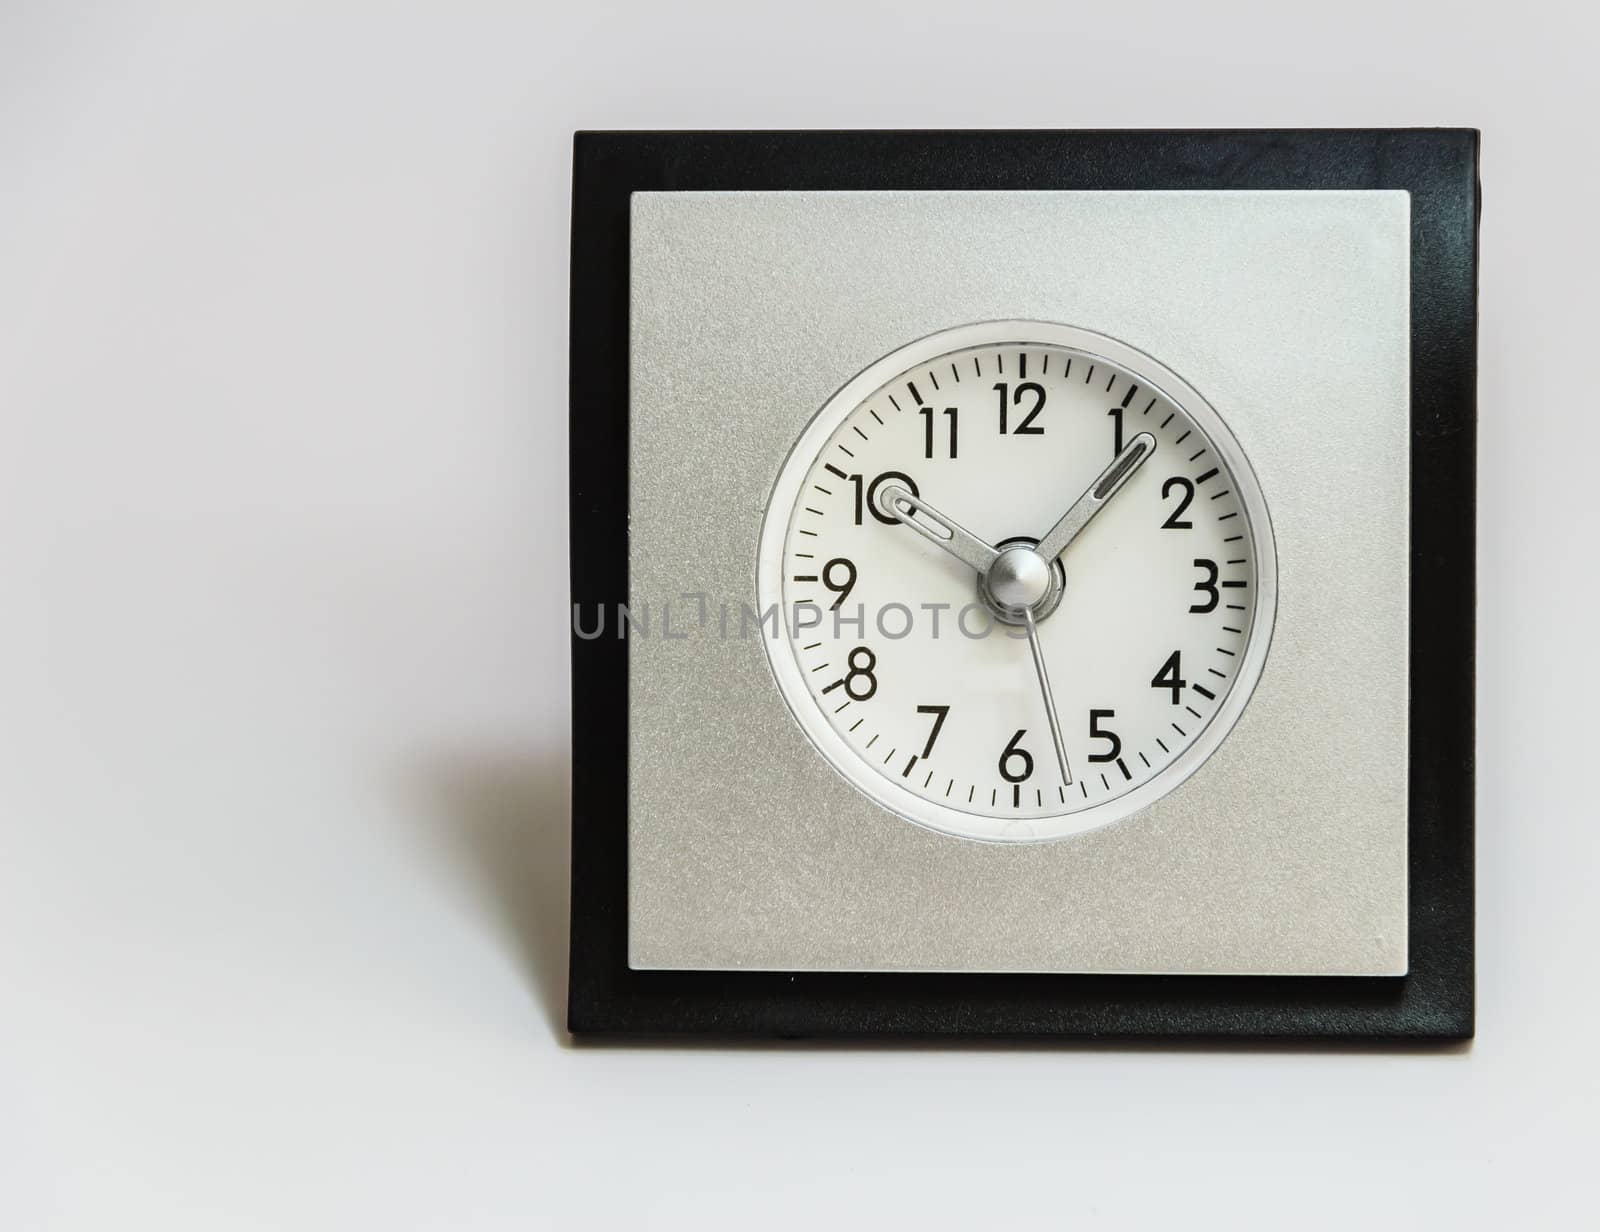 Alarm Clock, Square Shape with Rounded dial